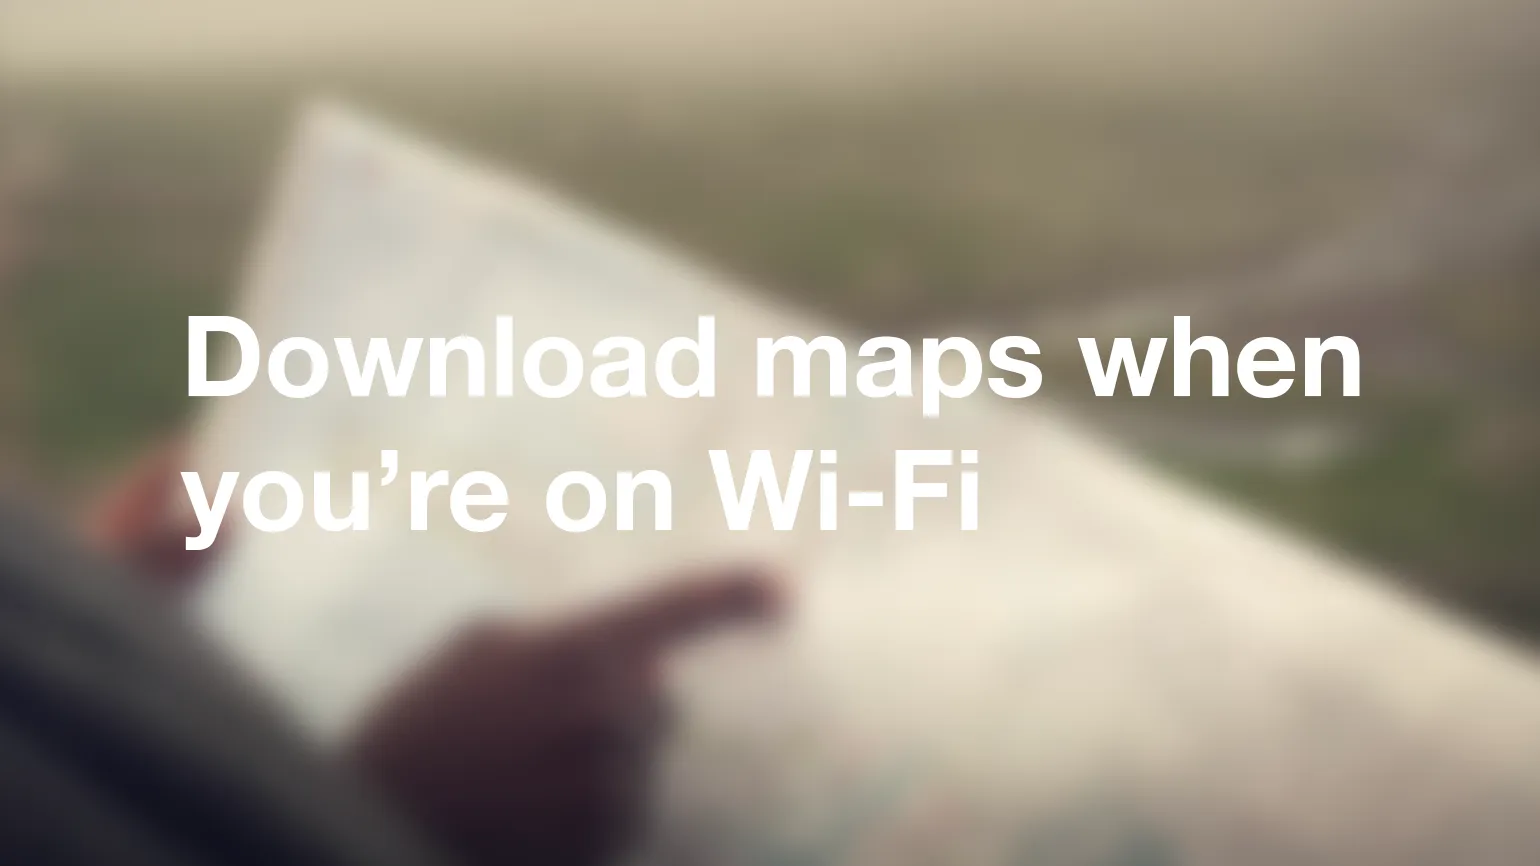 Download maps when you’re on Wi-Fi